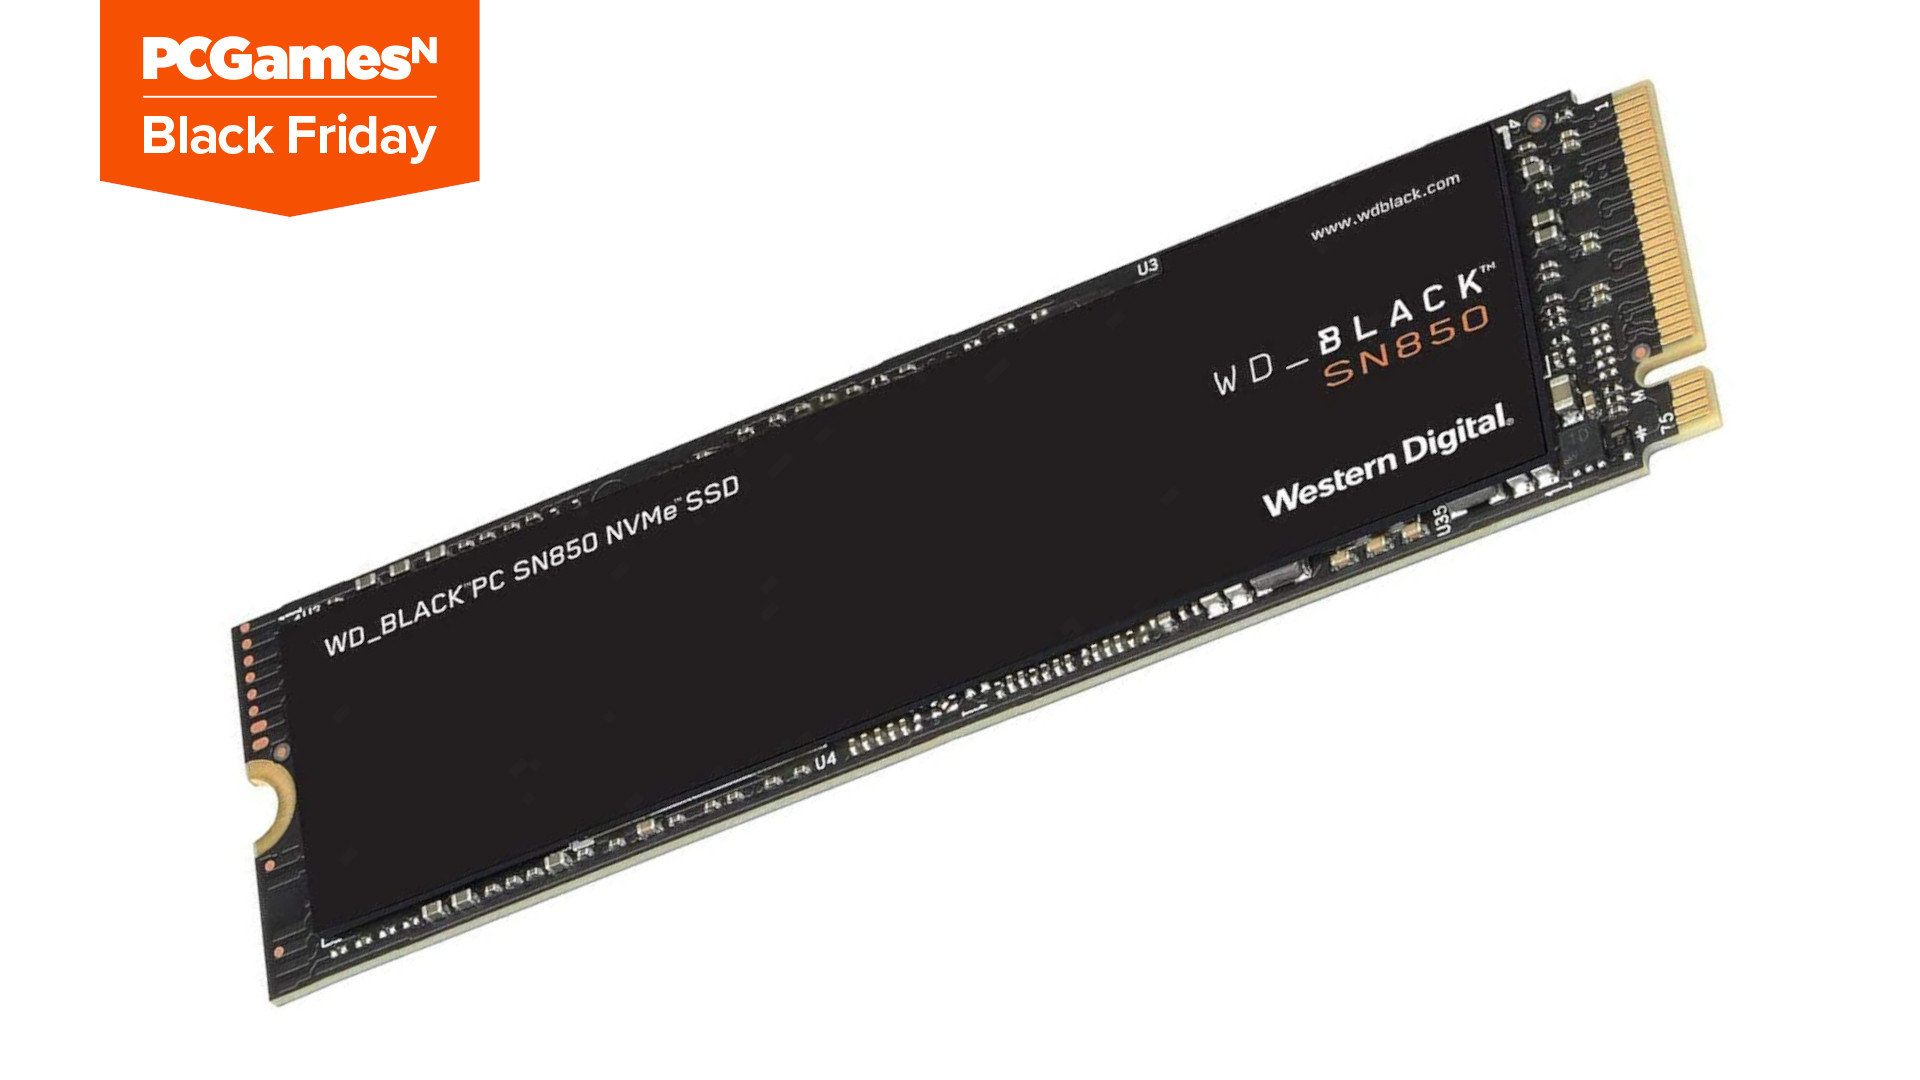 Get 40% off the WD_BLACK SN850 gaming SSD this Black Friday on Amazon